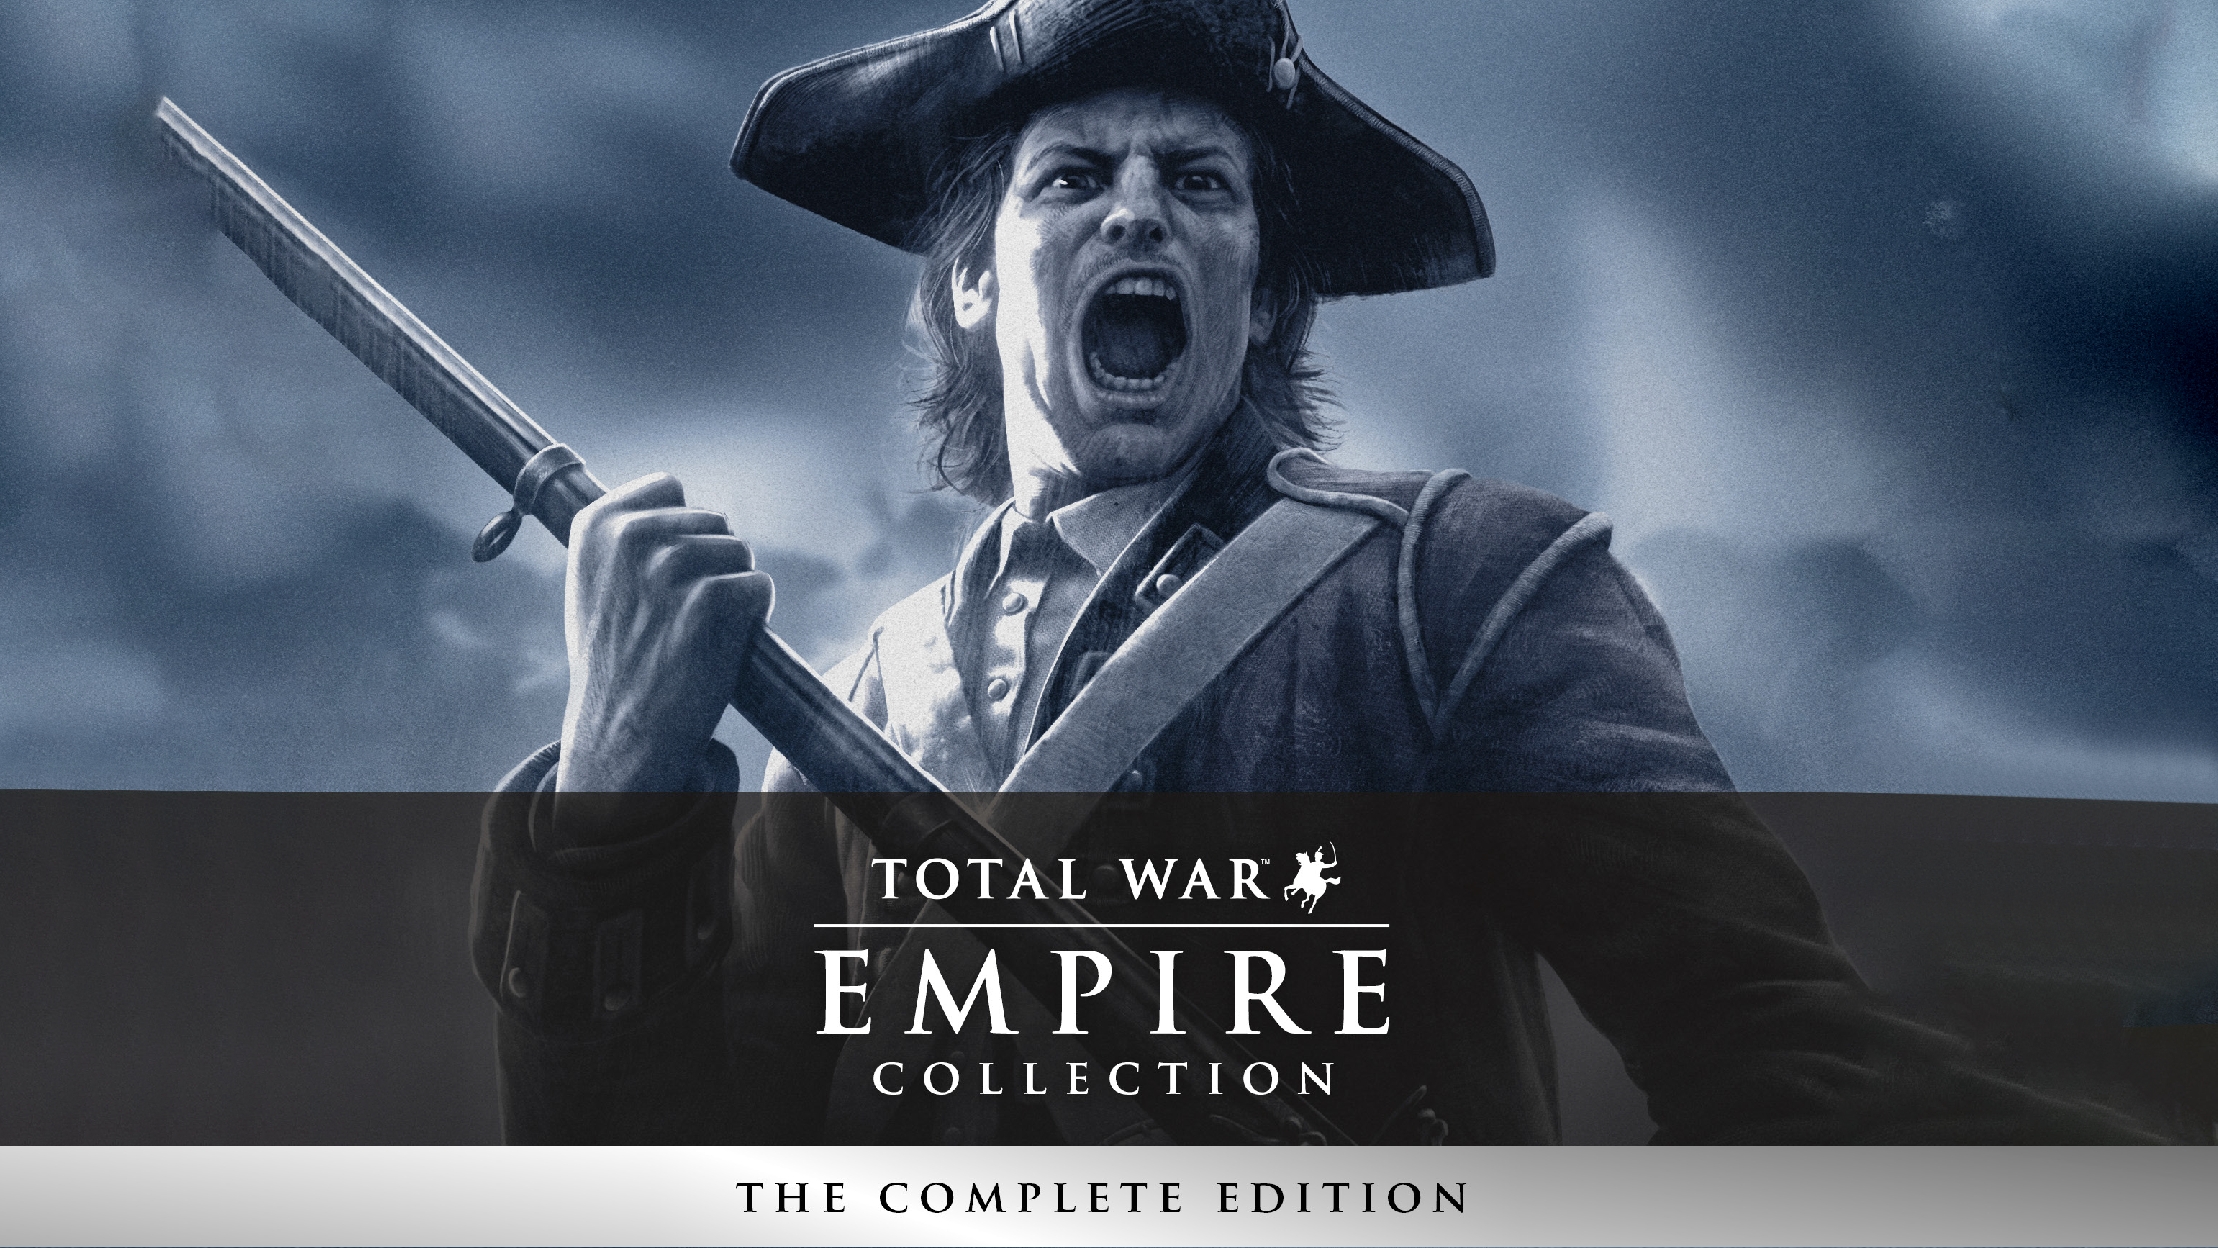 is there any way to play empire total war without steam